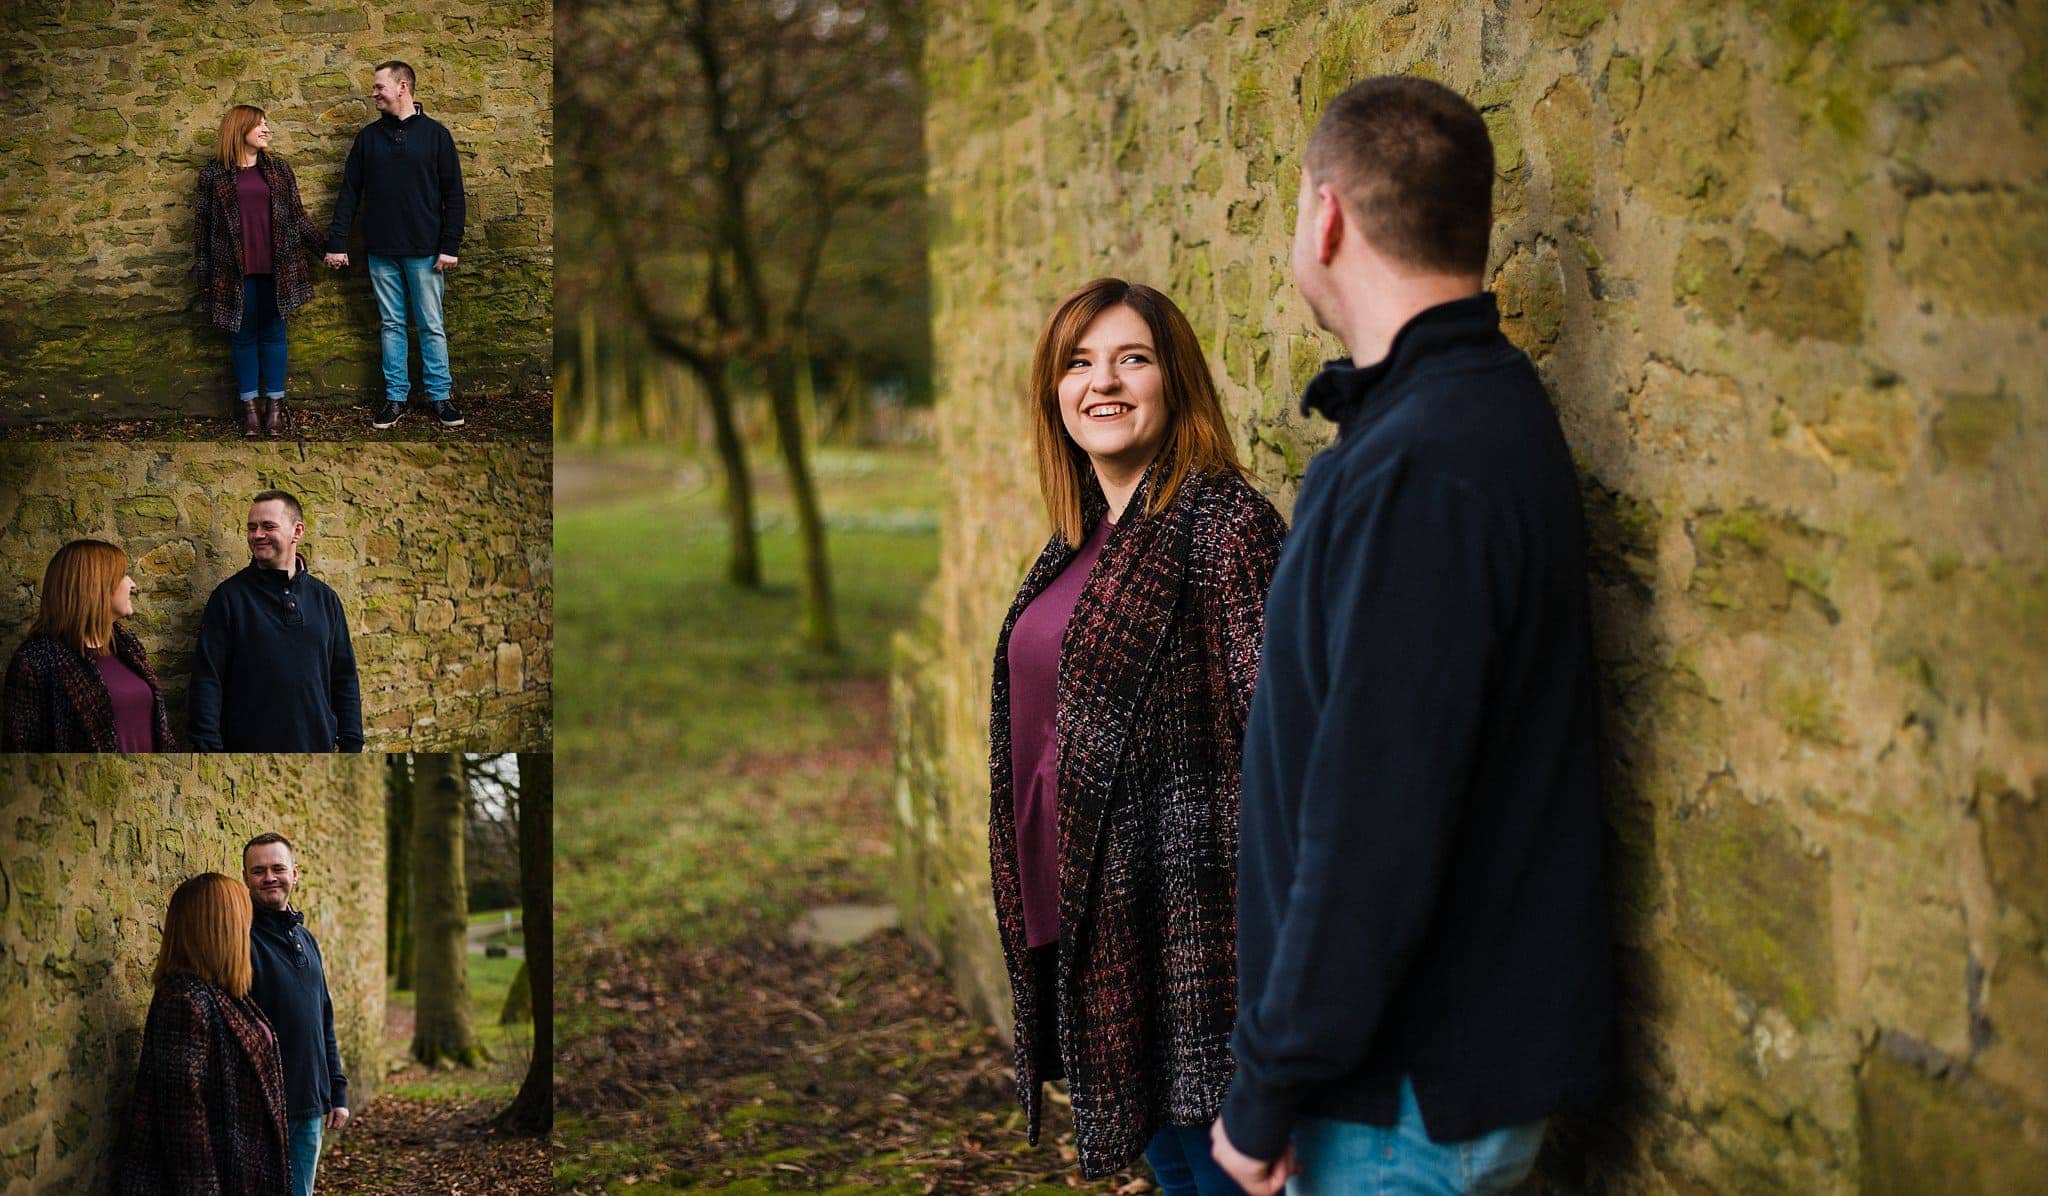 A collage of four photos showing a woman and a man during an outdoor winter engagement photo session next to a stone wall, capturing both candid and posed moments.